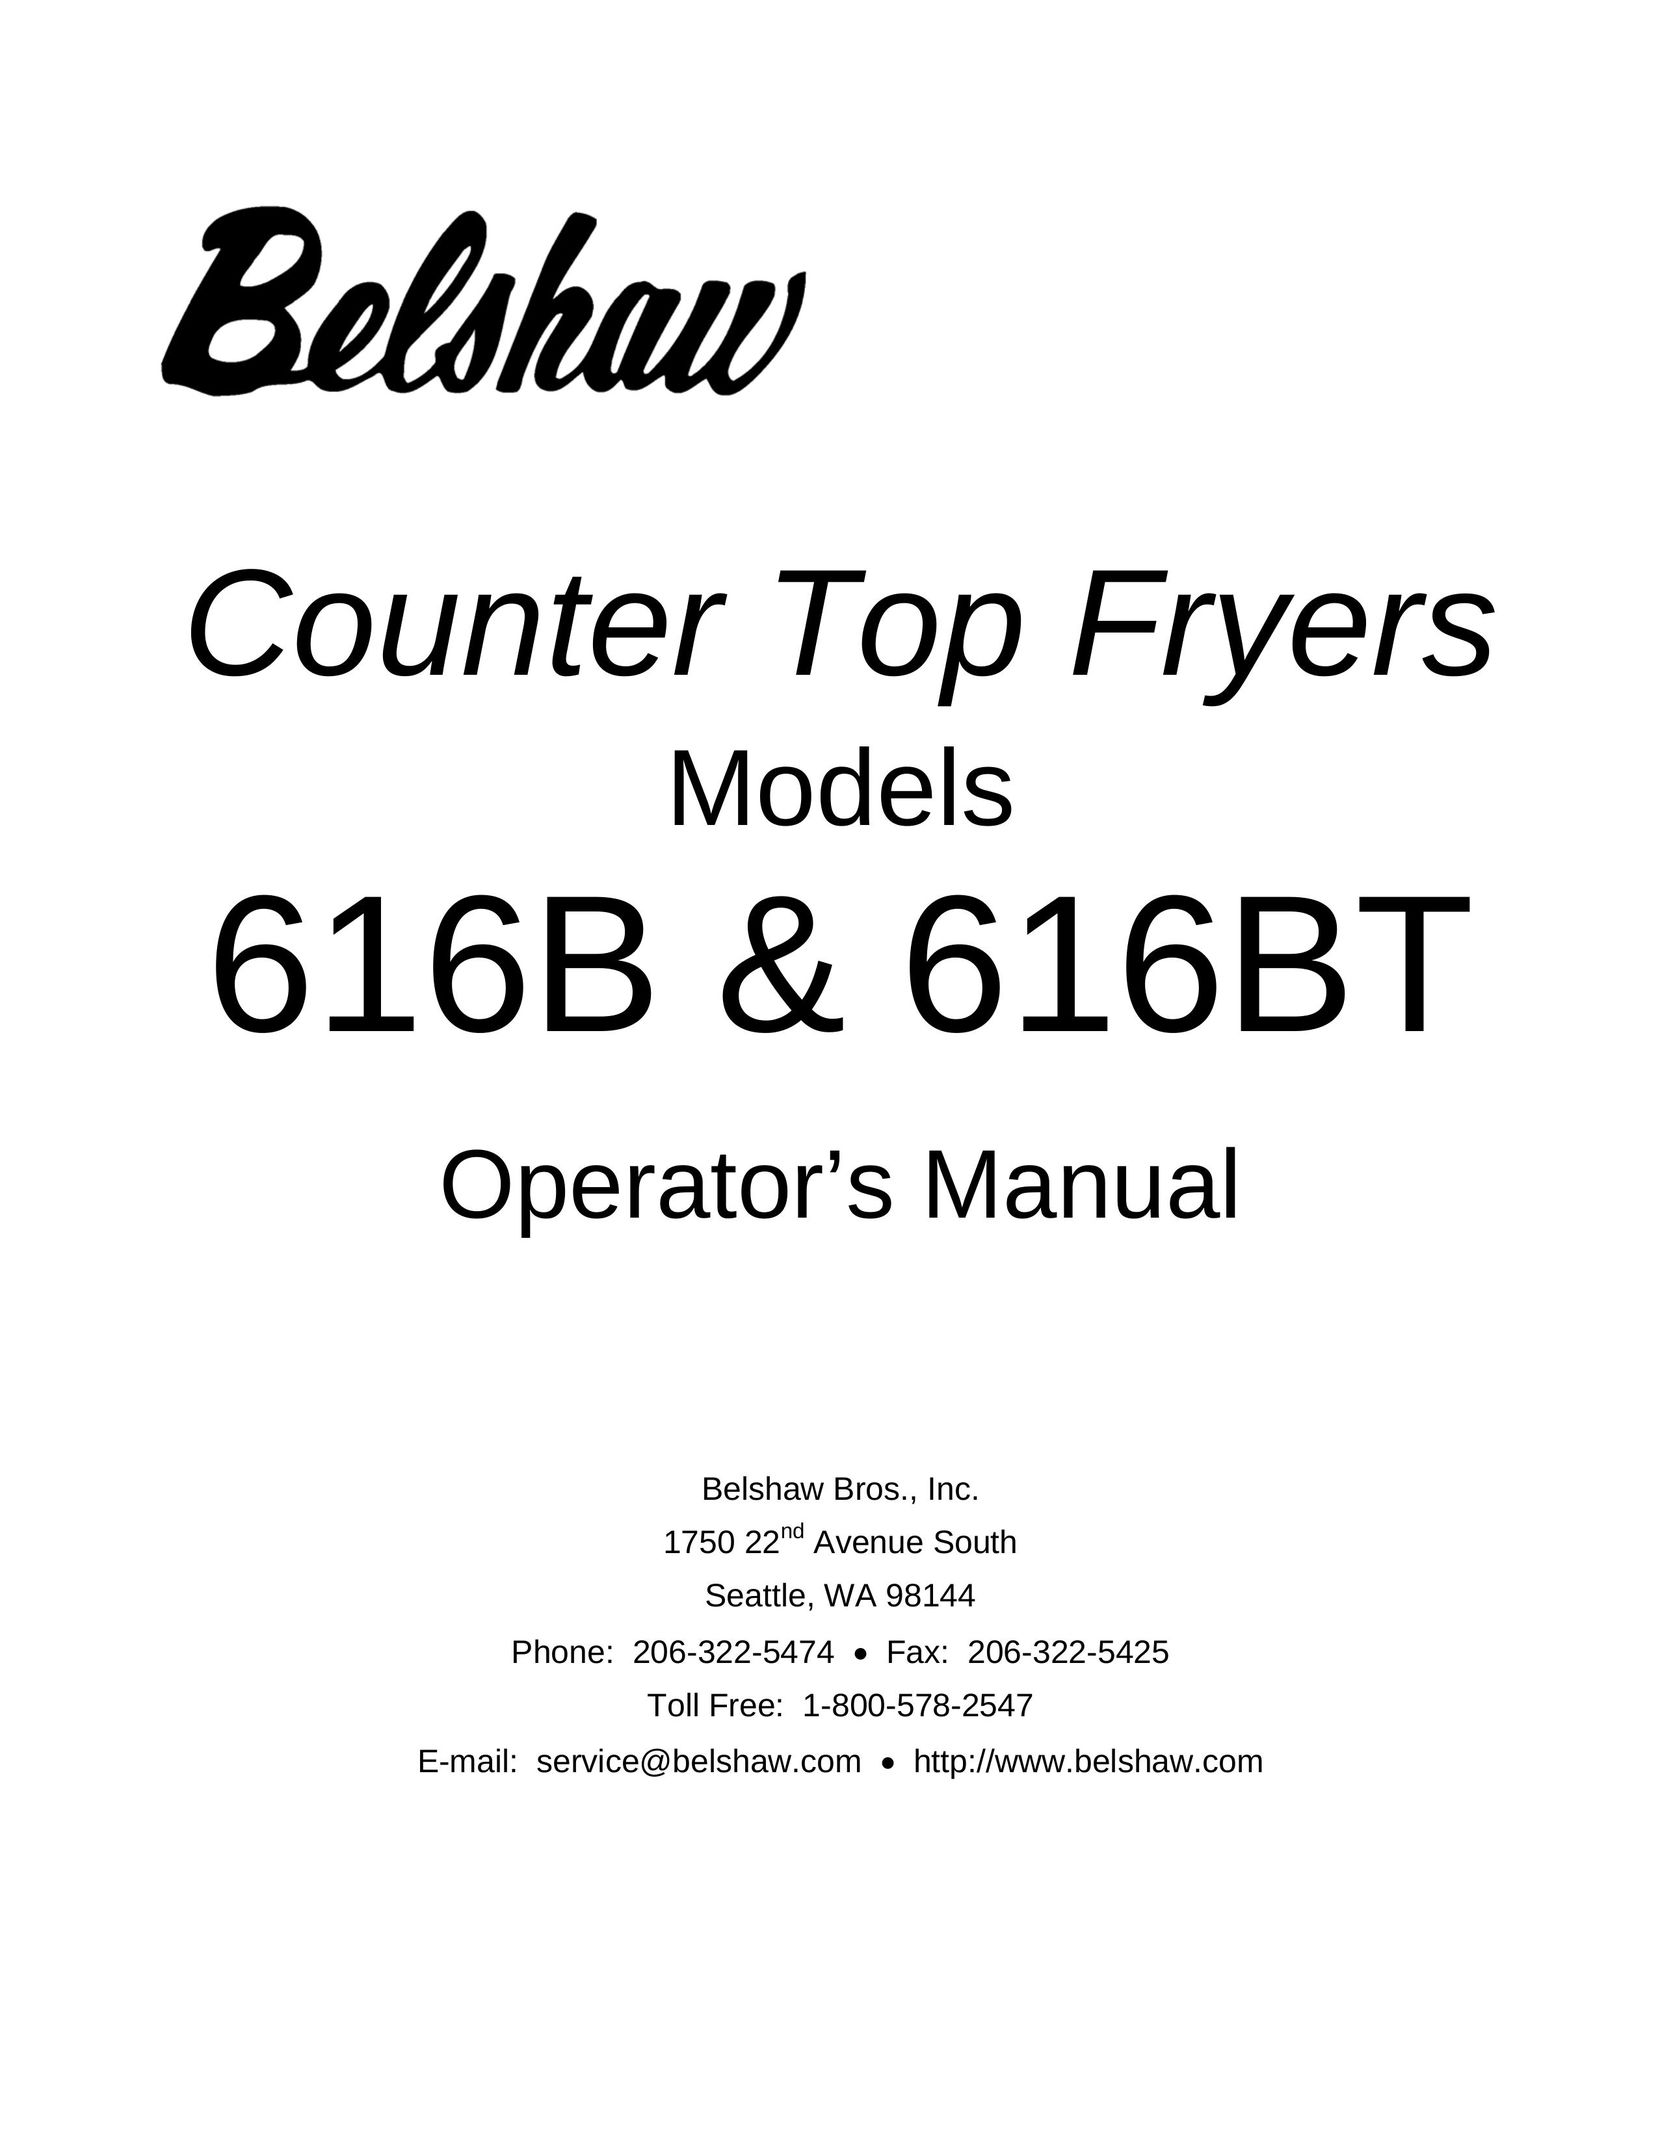 Belshaw Brothers 616B Fryer User Manual